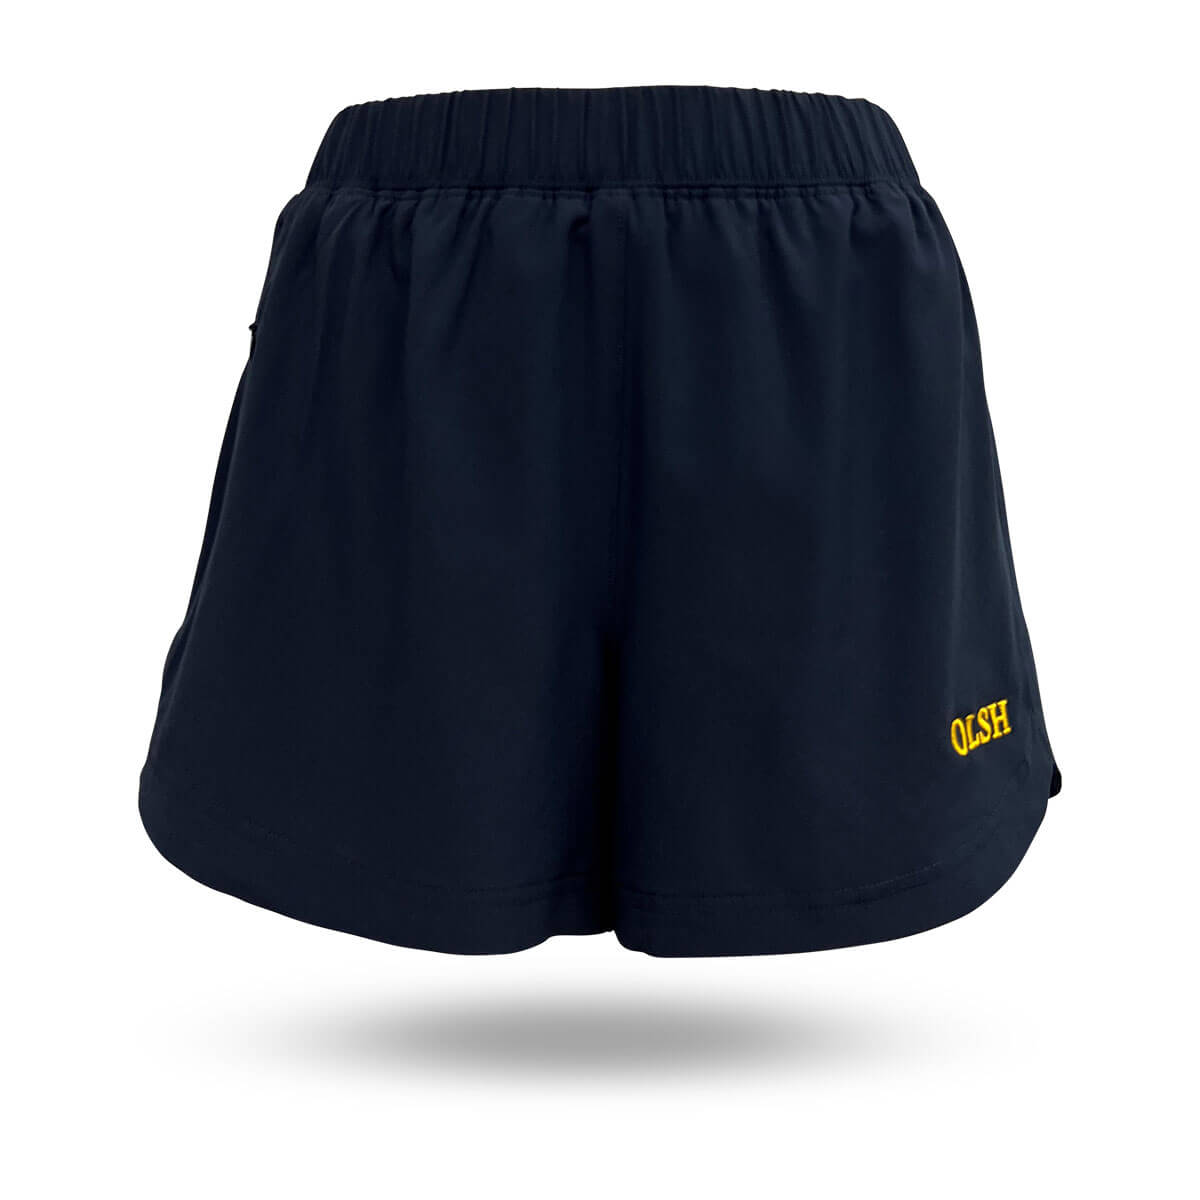 OLSH Kensington Sport Short, Our Lady of the Sacred Heart College